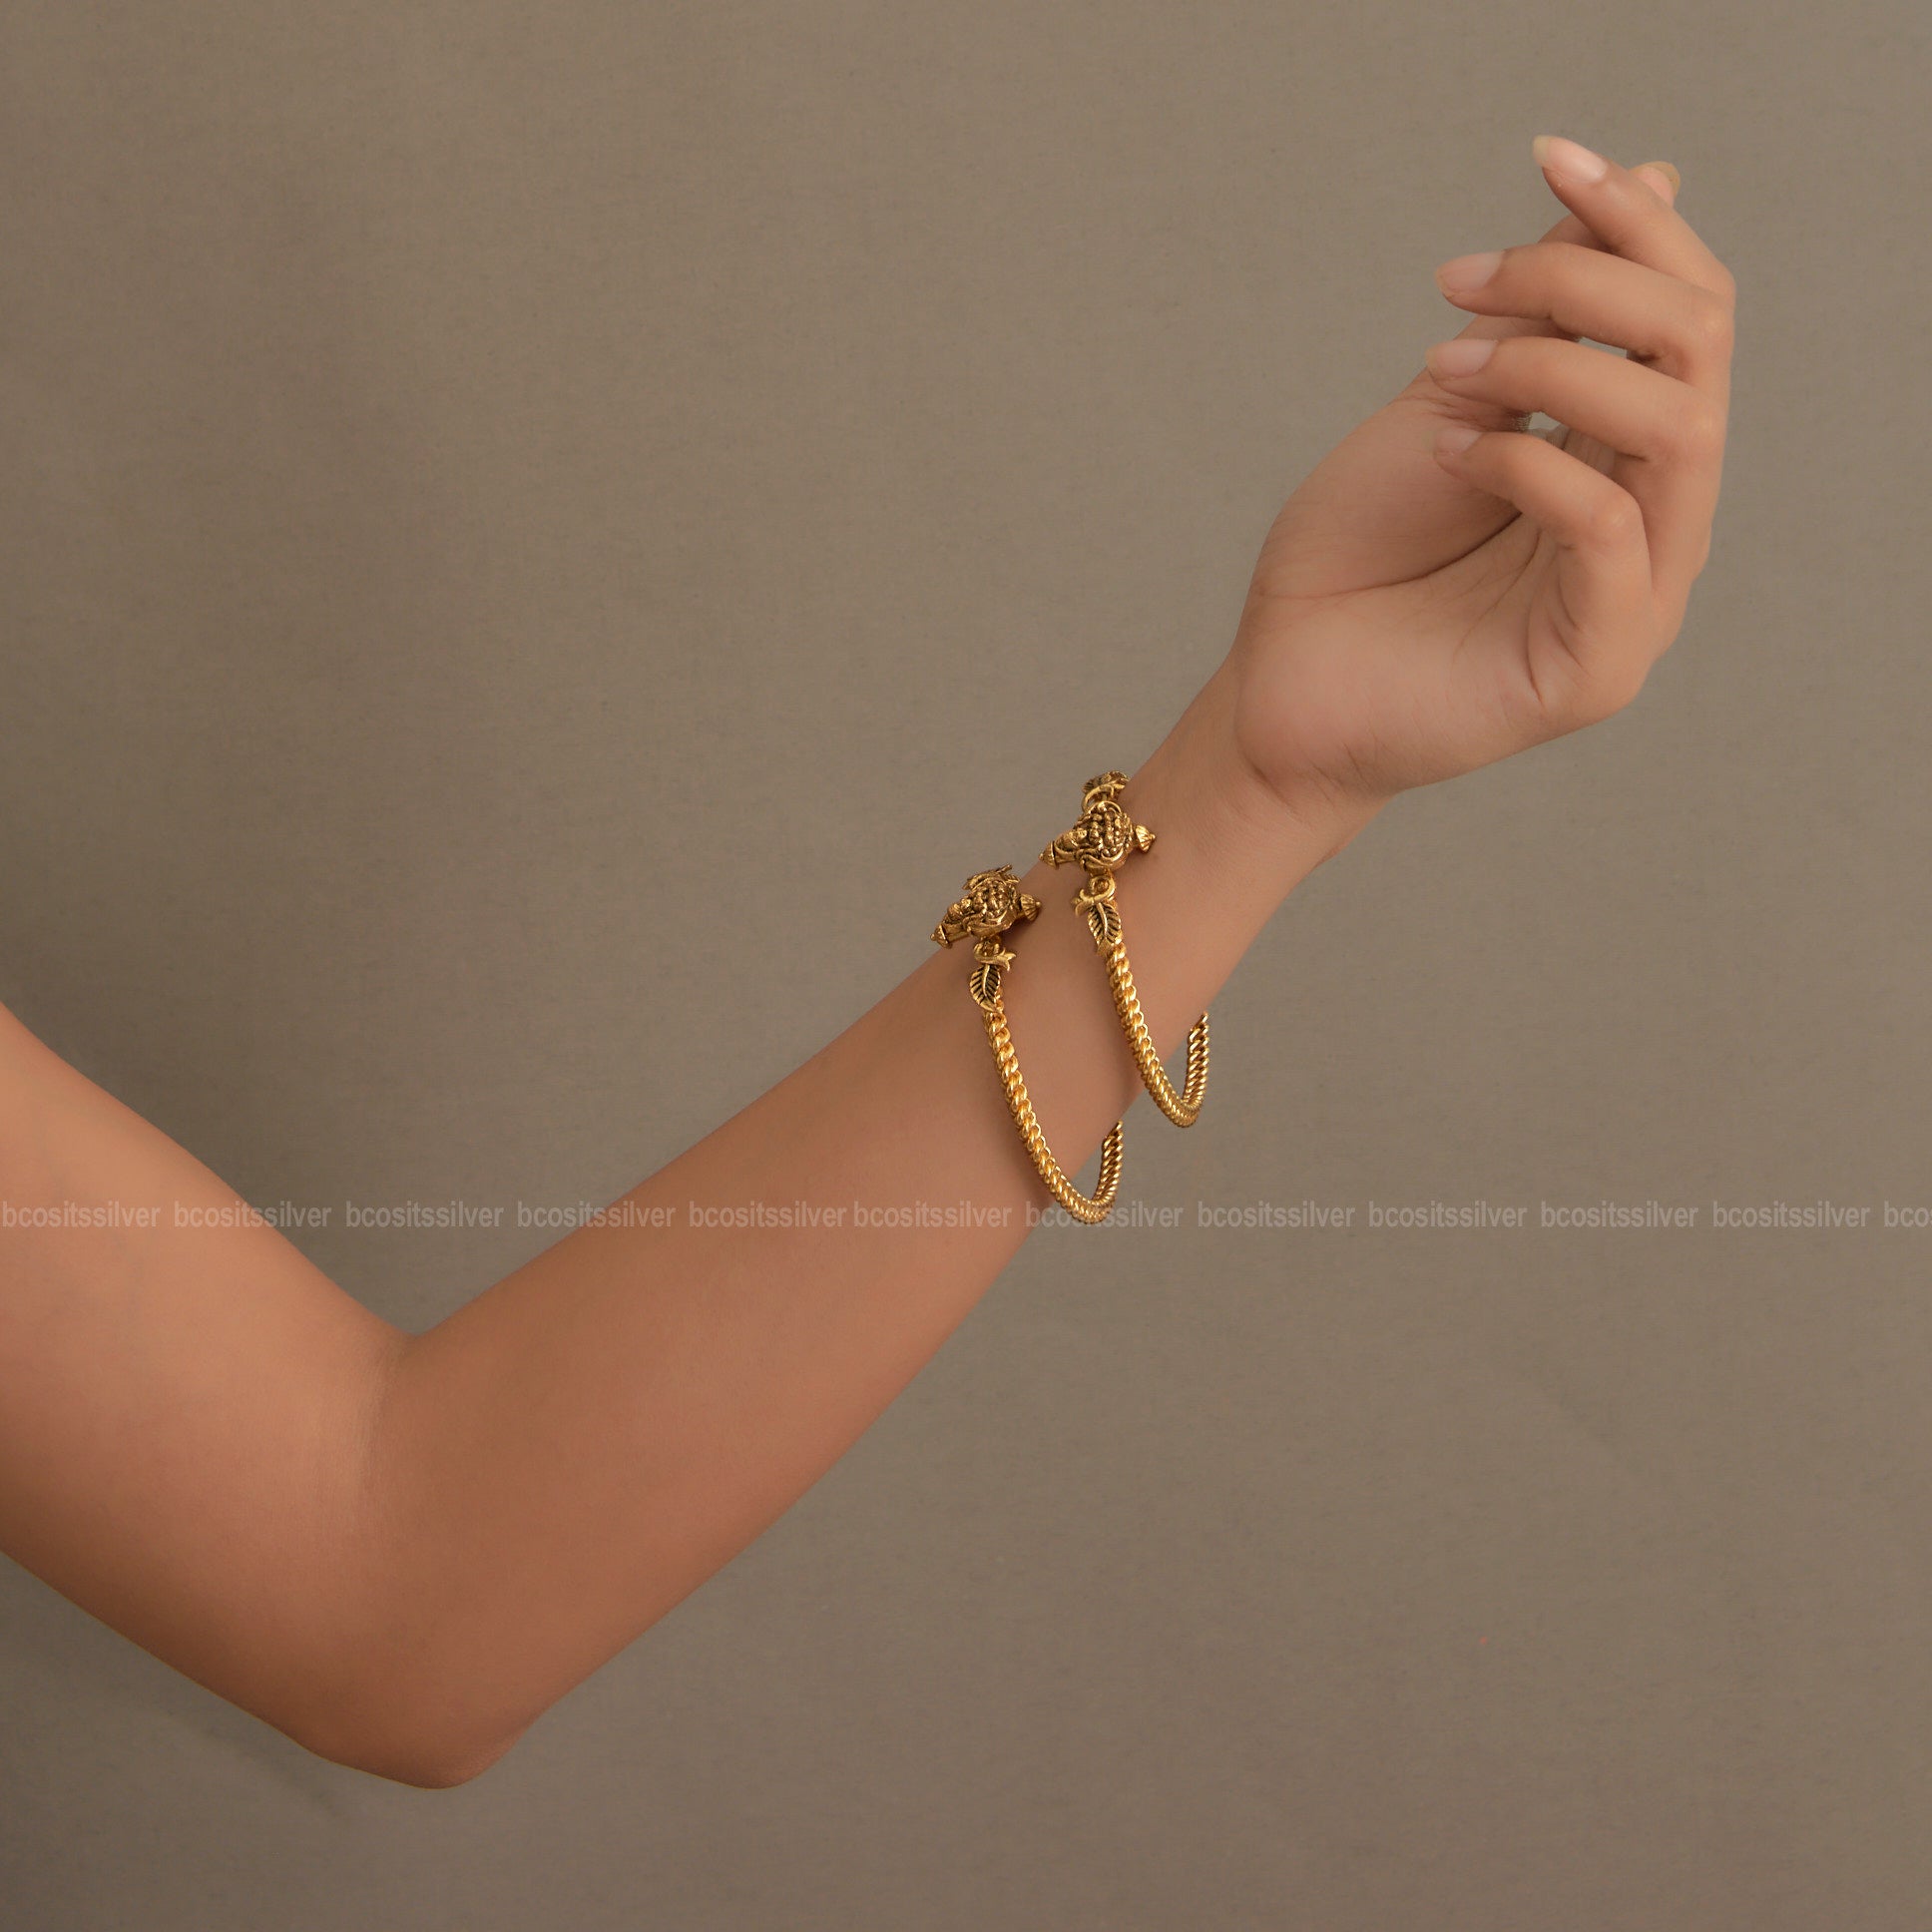 Gold Plated Lakshmi Bangle - 1440 - Made to order